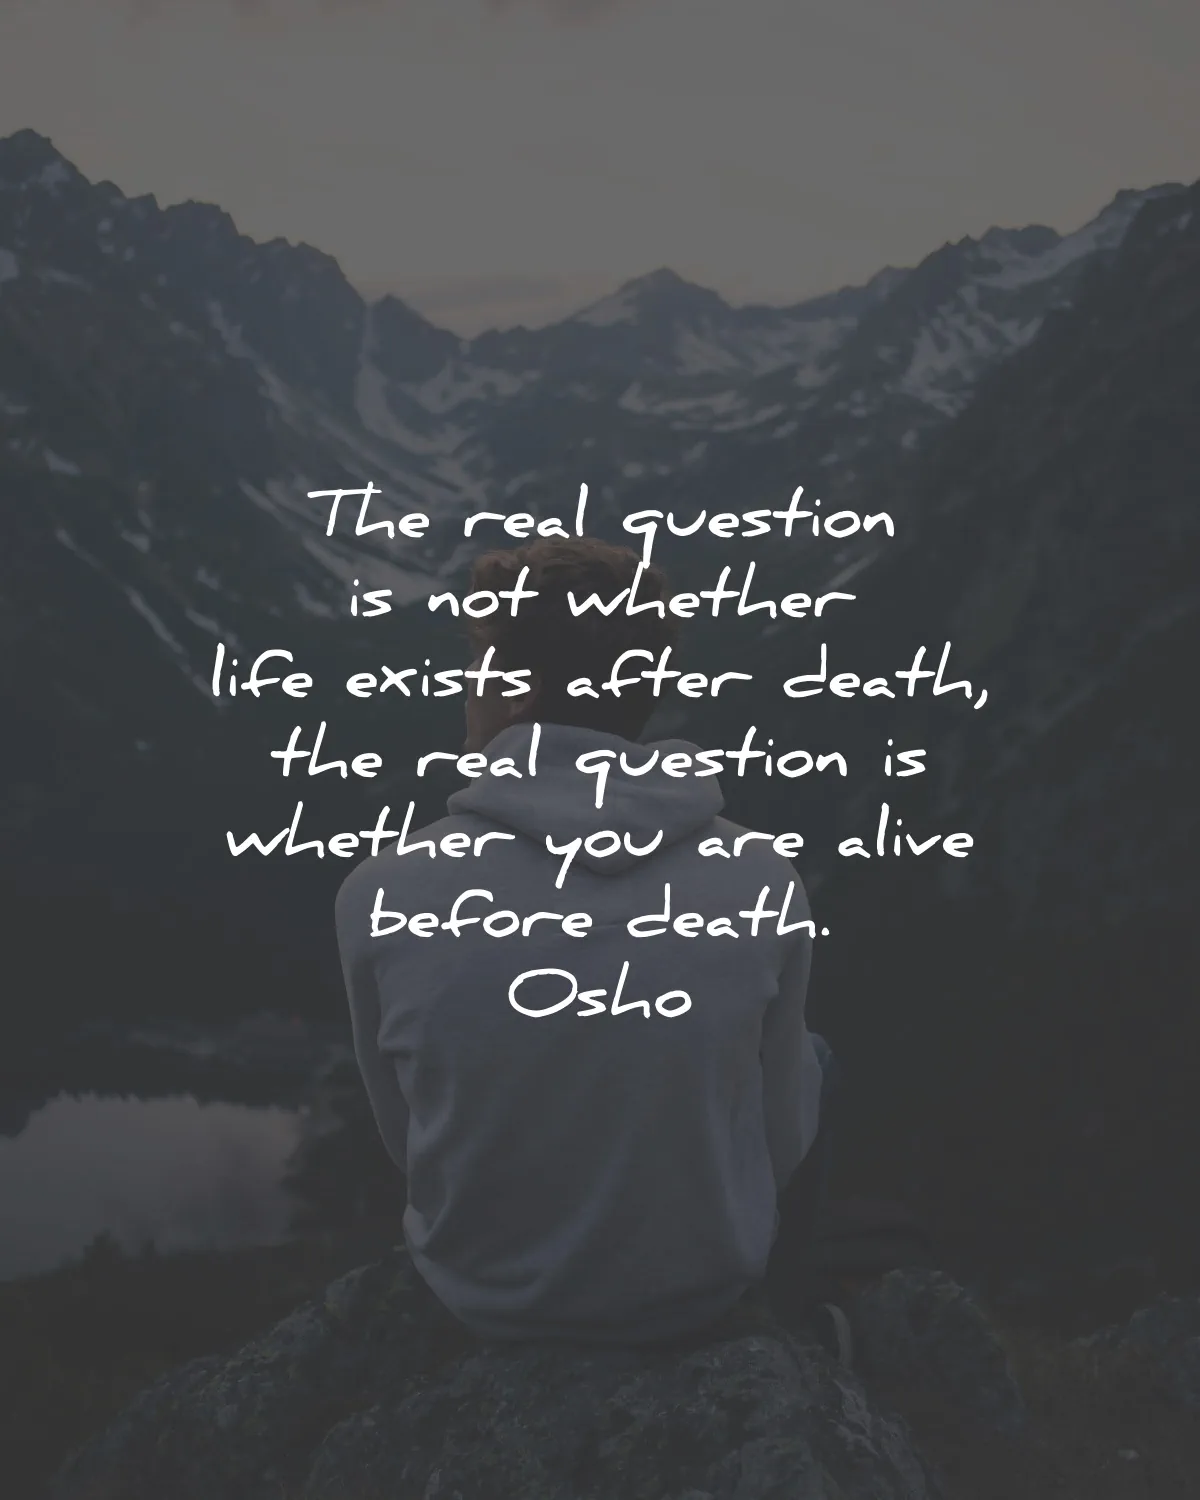 osho quotes question life exists death alive wisdom